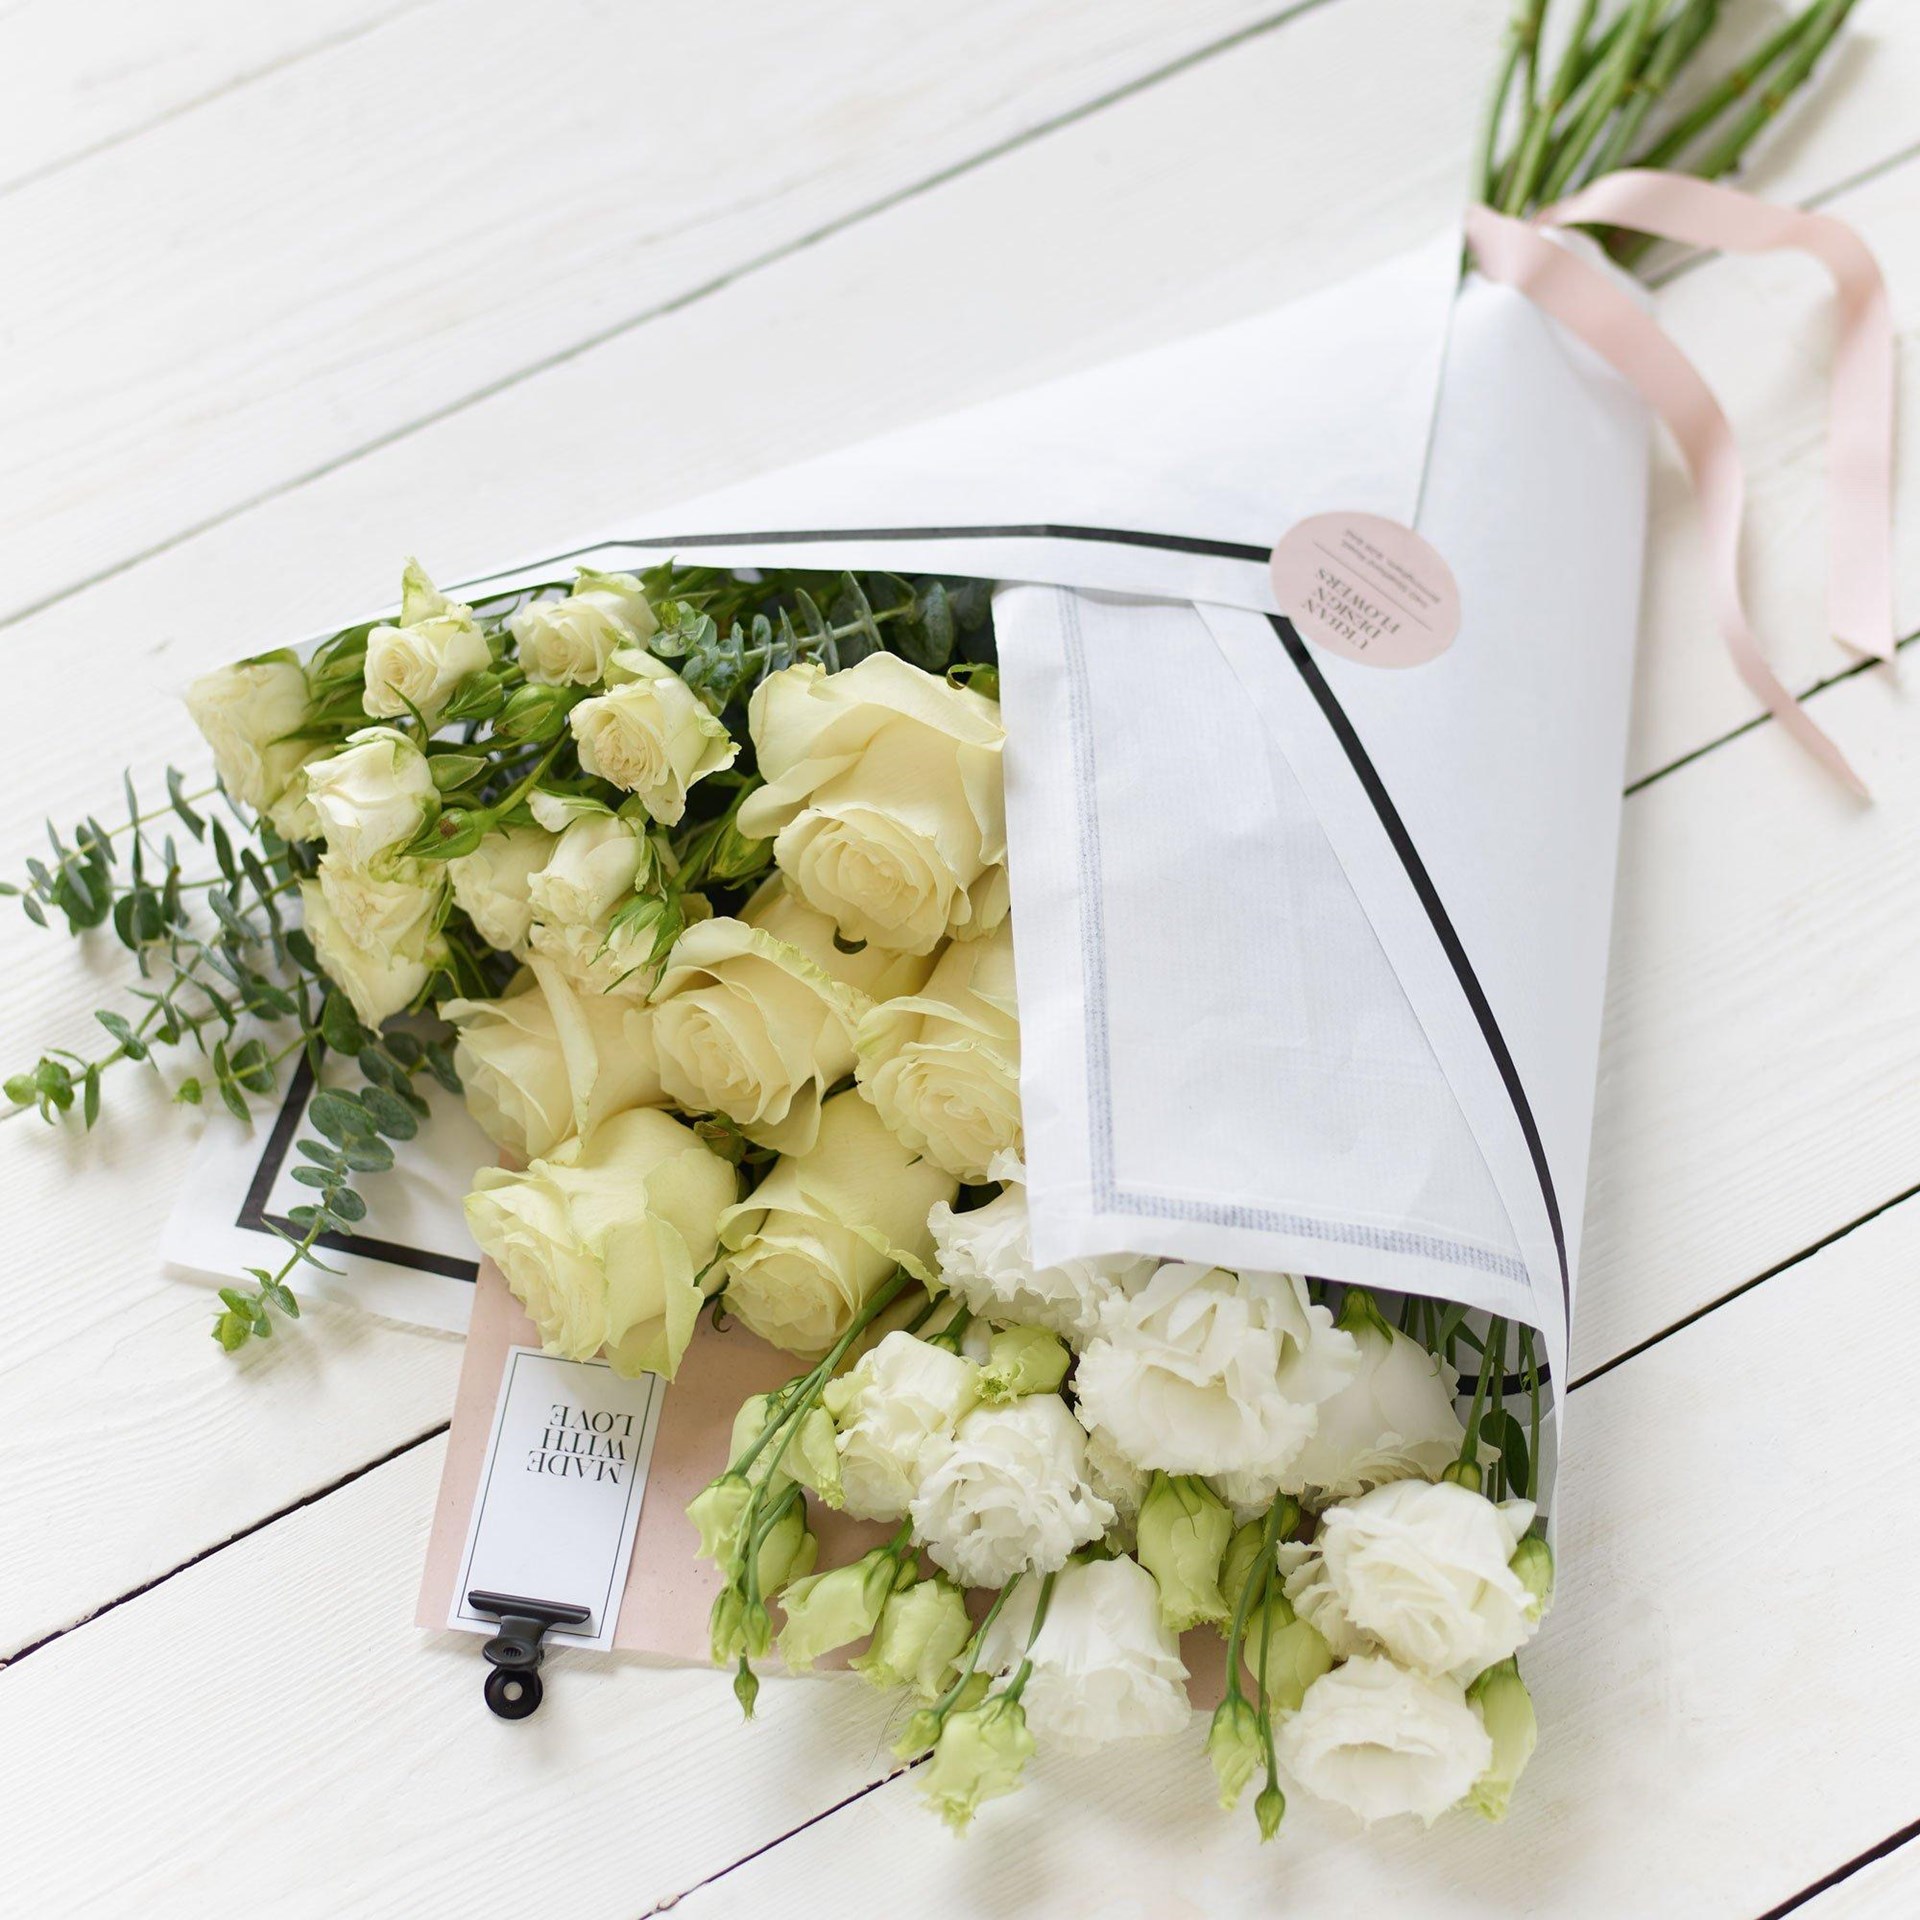 product image for Beautifully Simple Large White Flower Wrap.